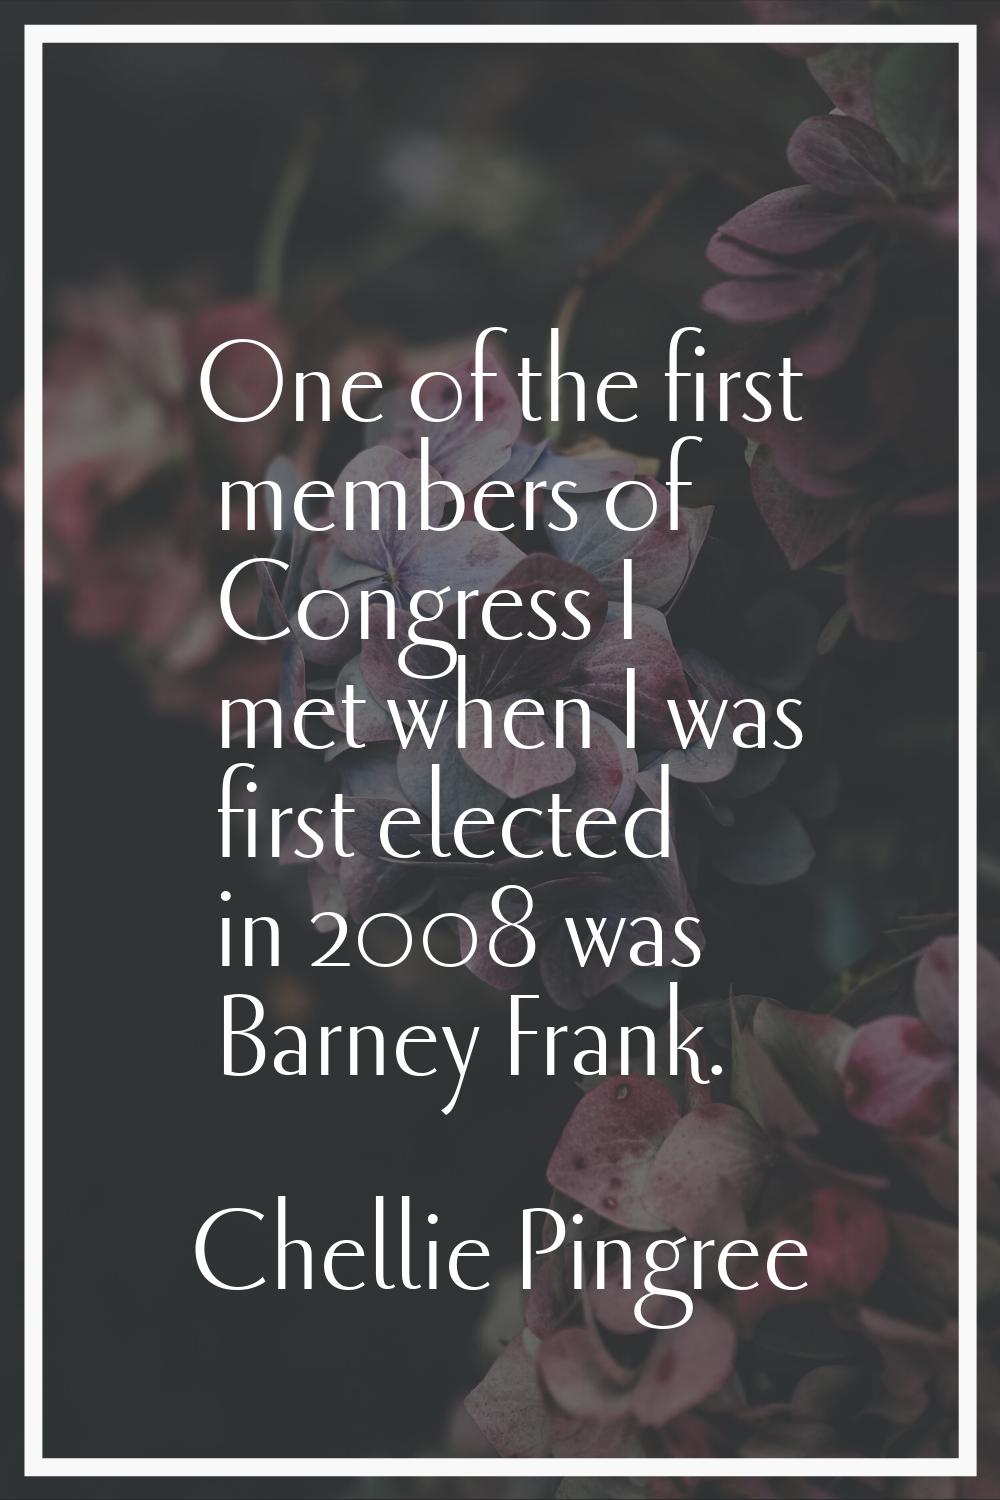 One of the first members of Congress I met when I was first elected in 2008 was Barney Frank.